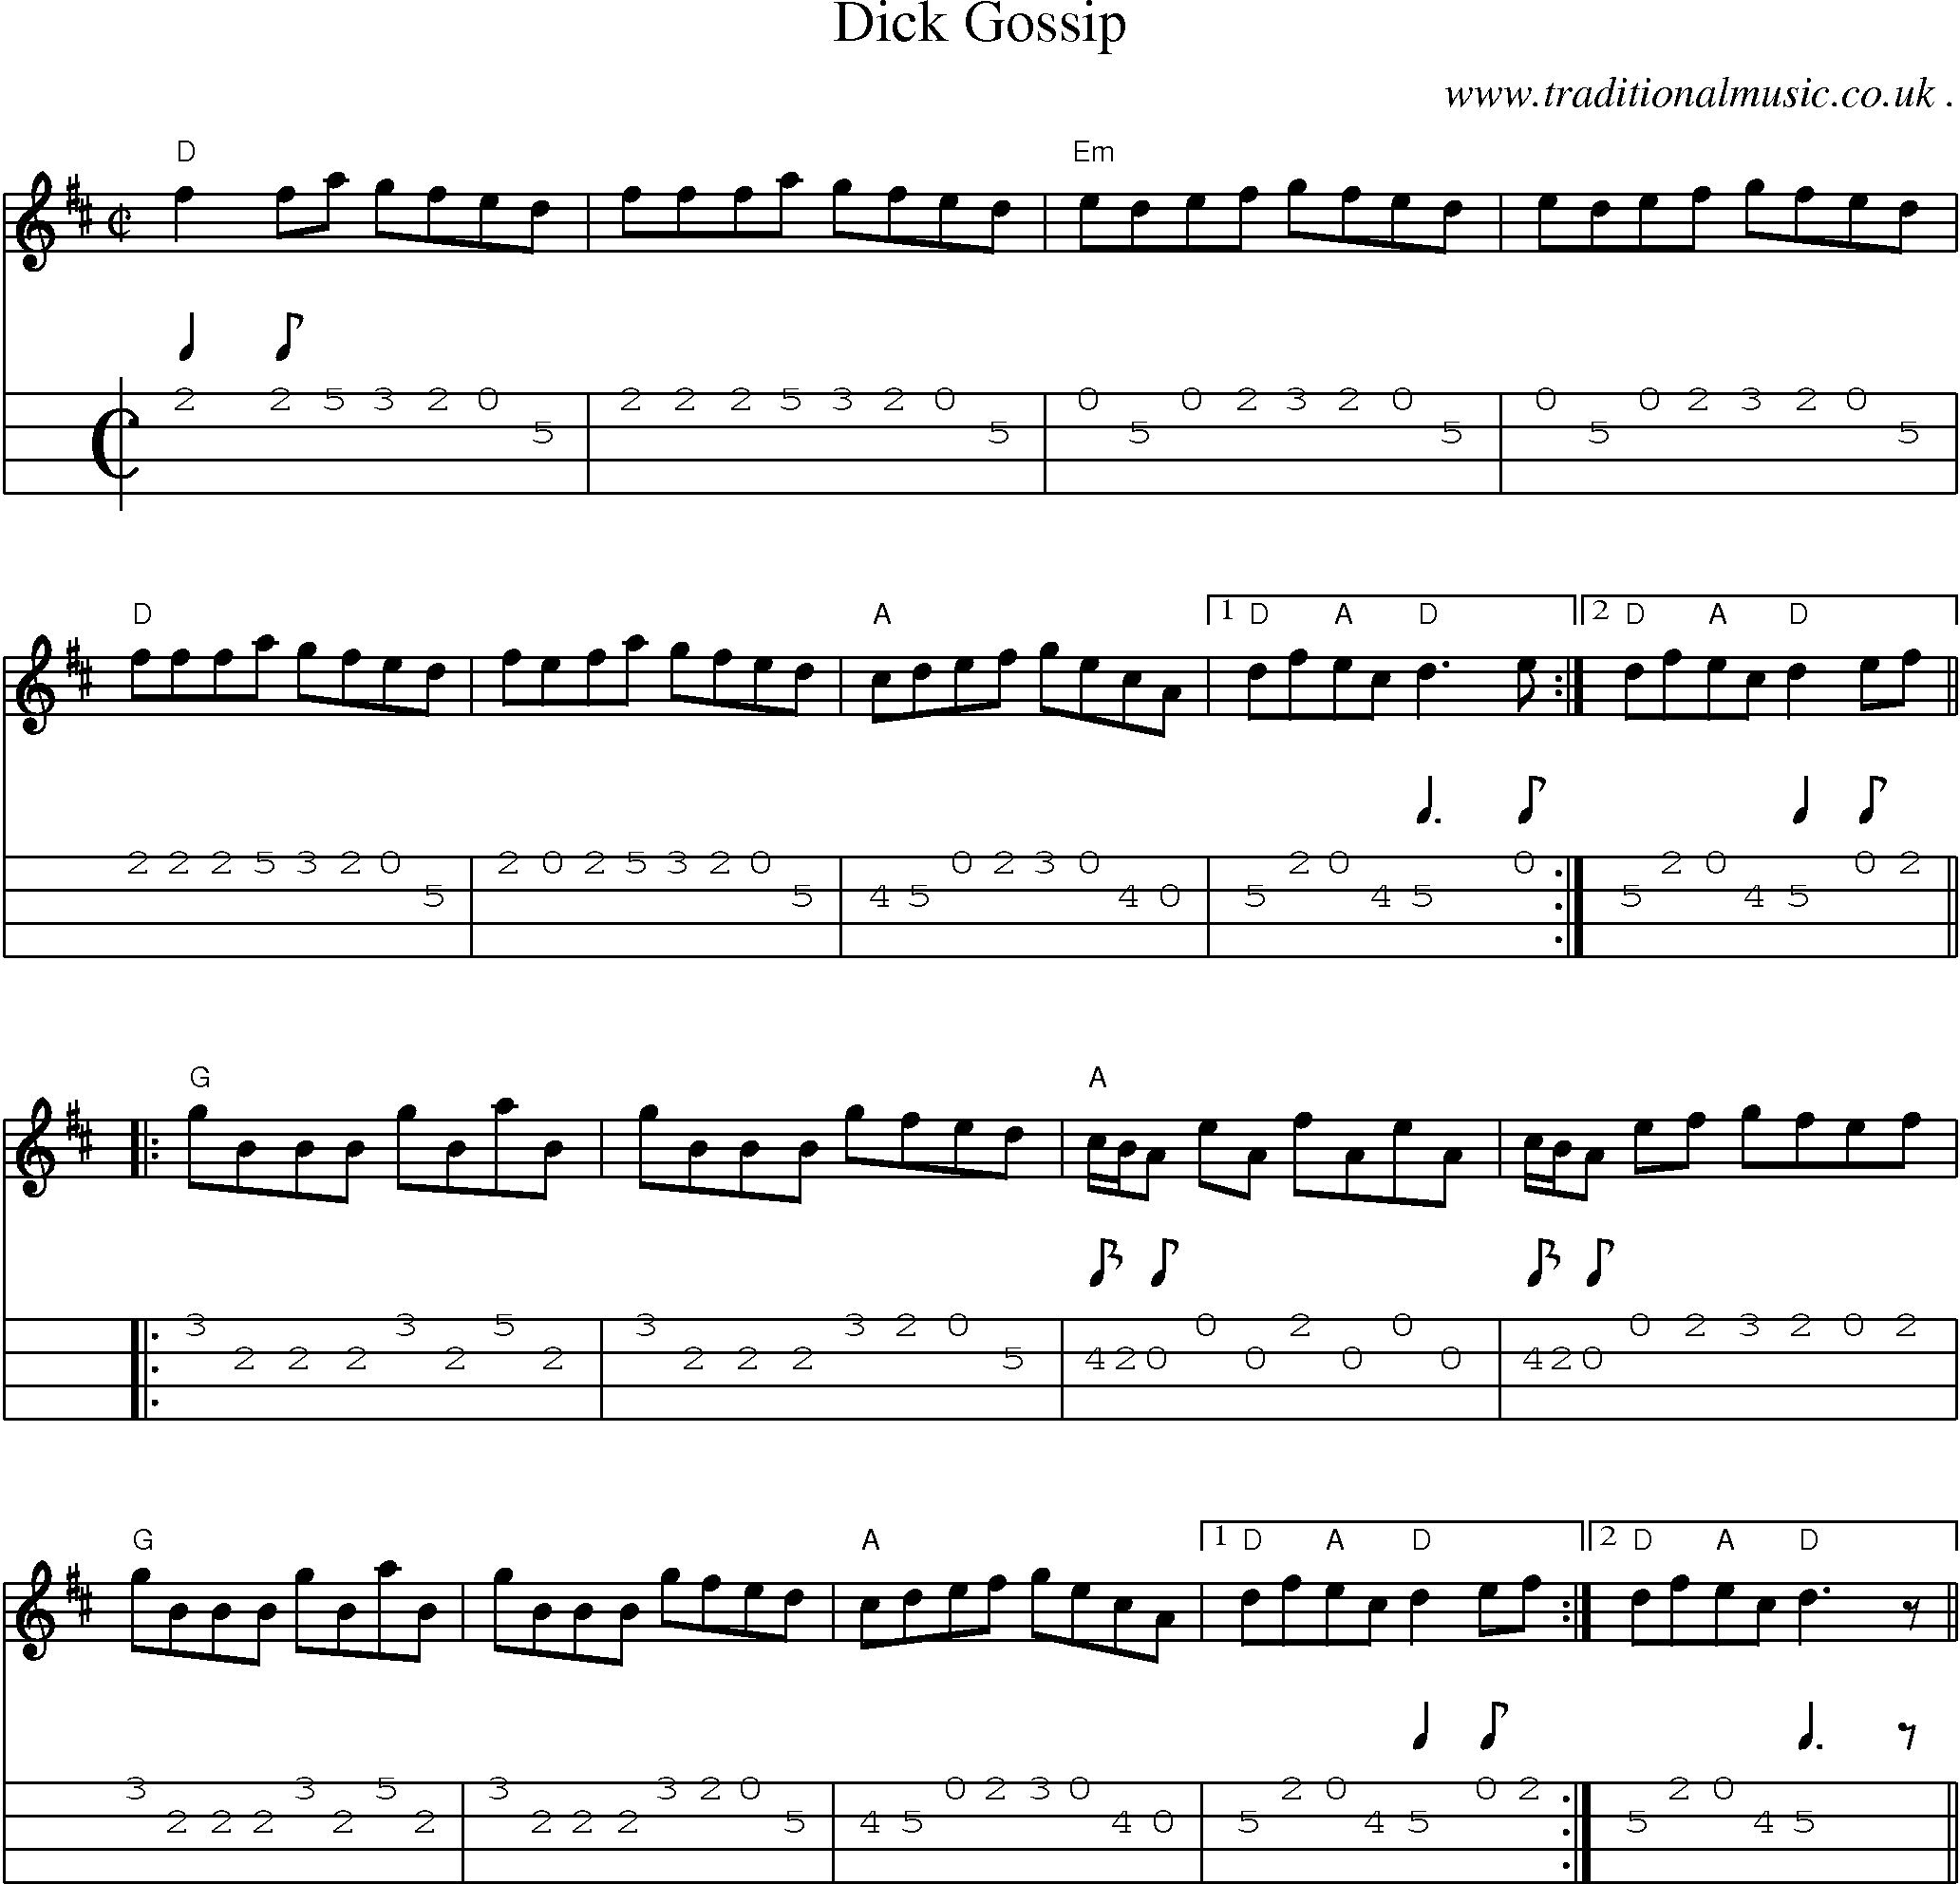 Music Score and Guitar Tabs for Dick Gossip